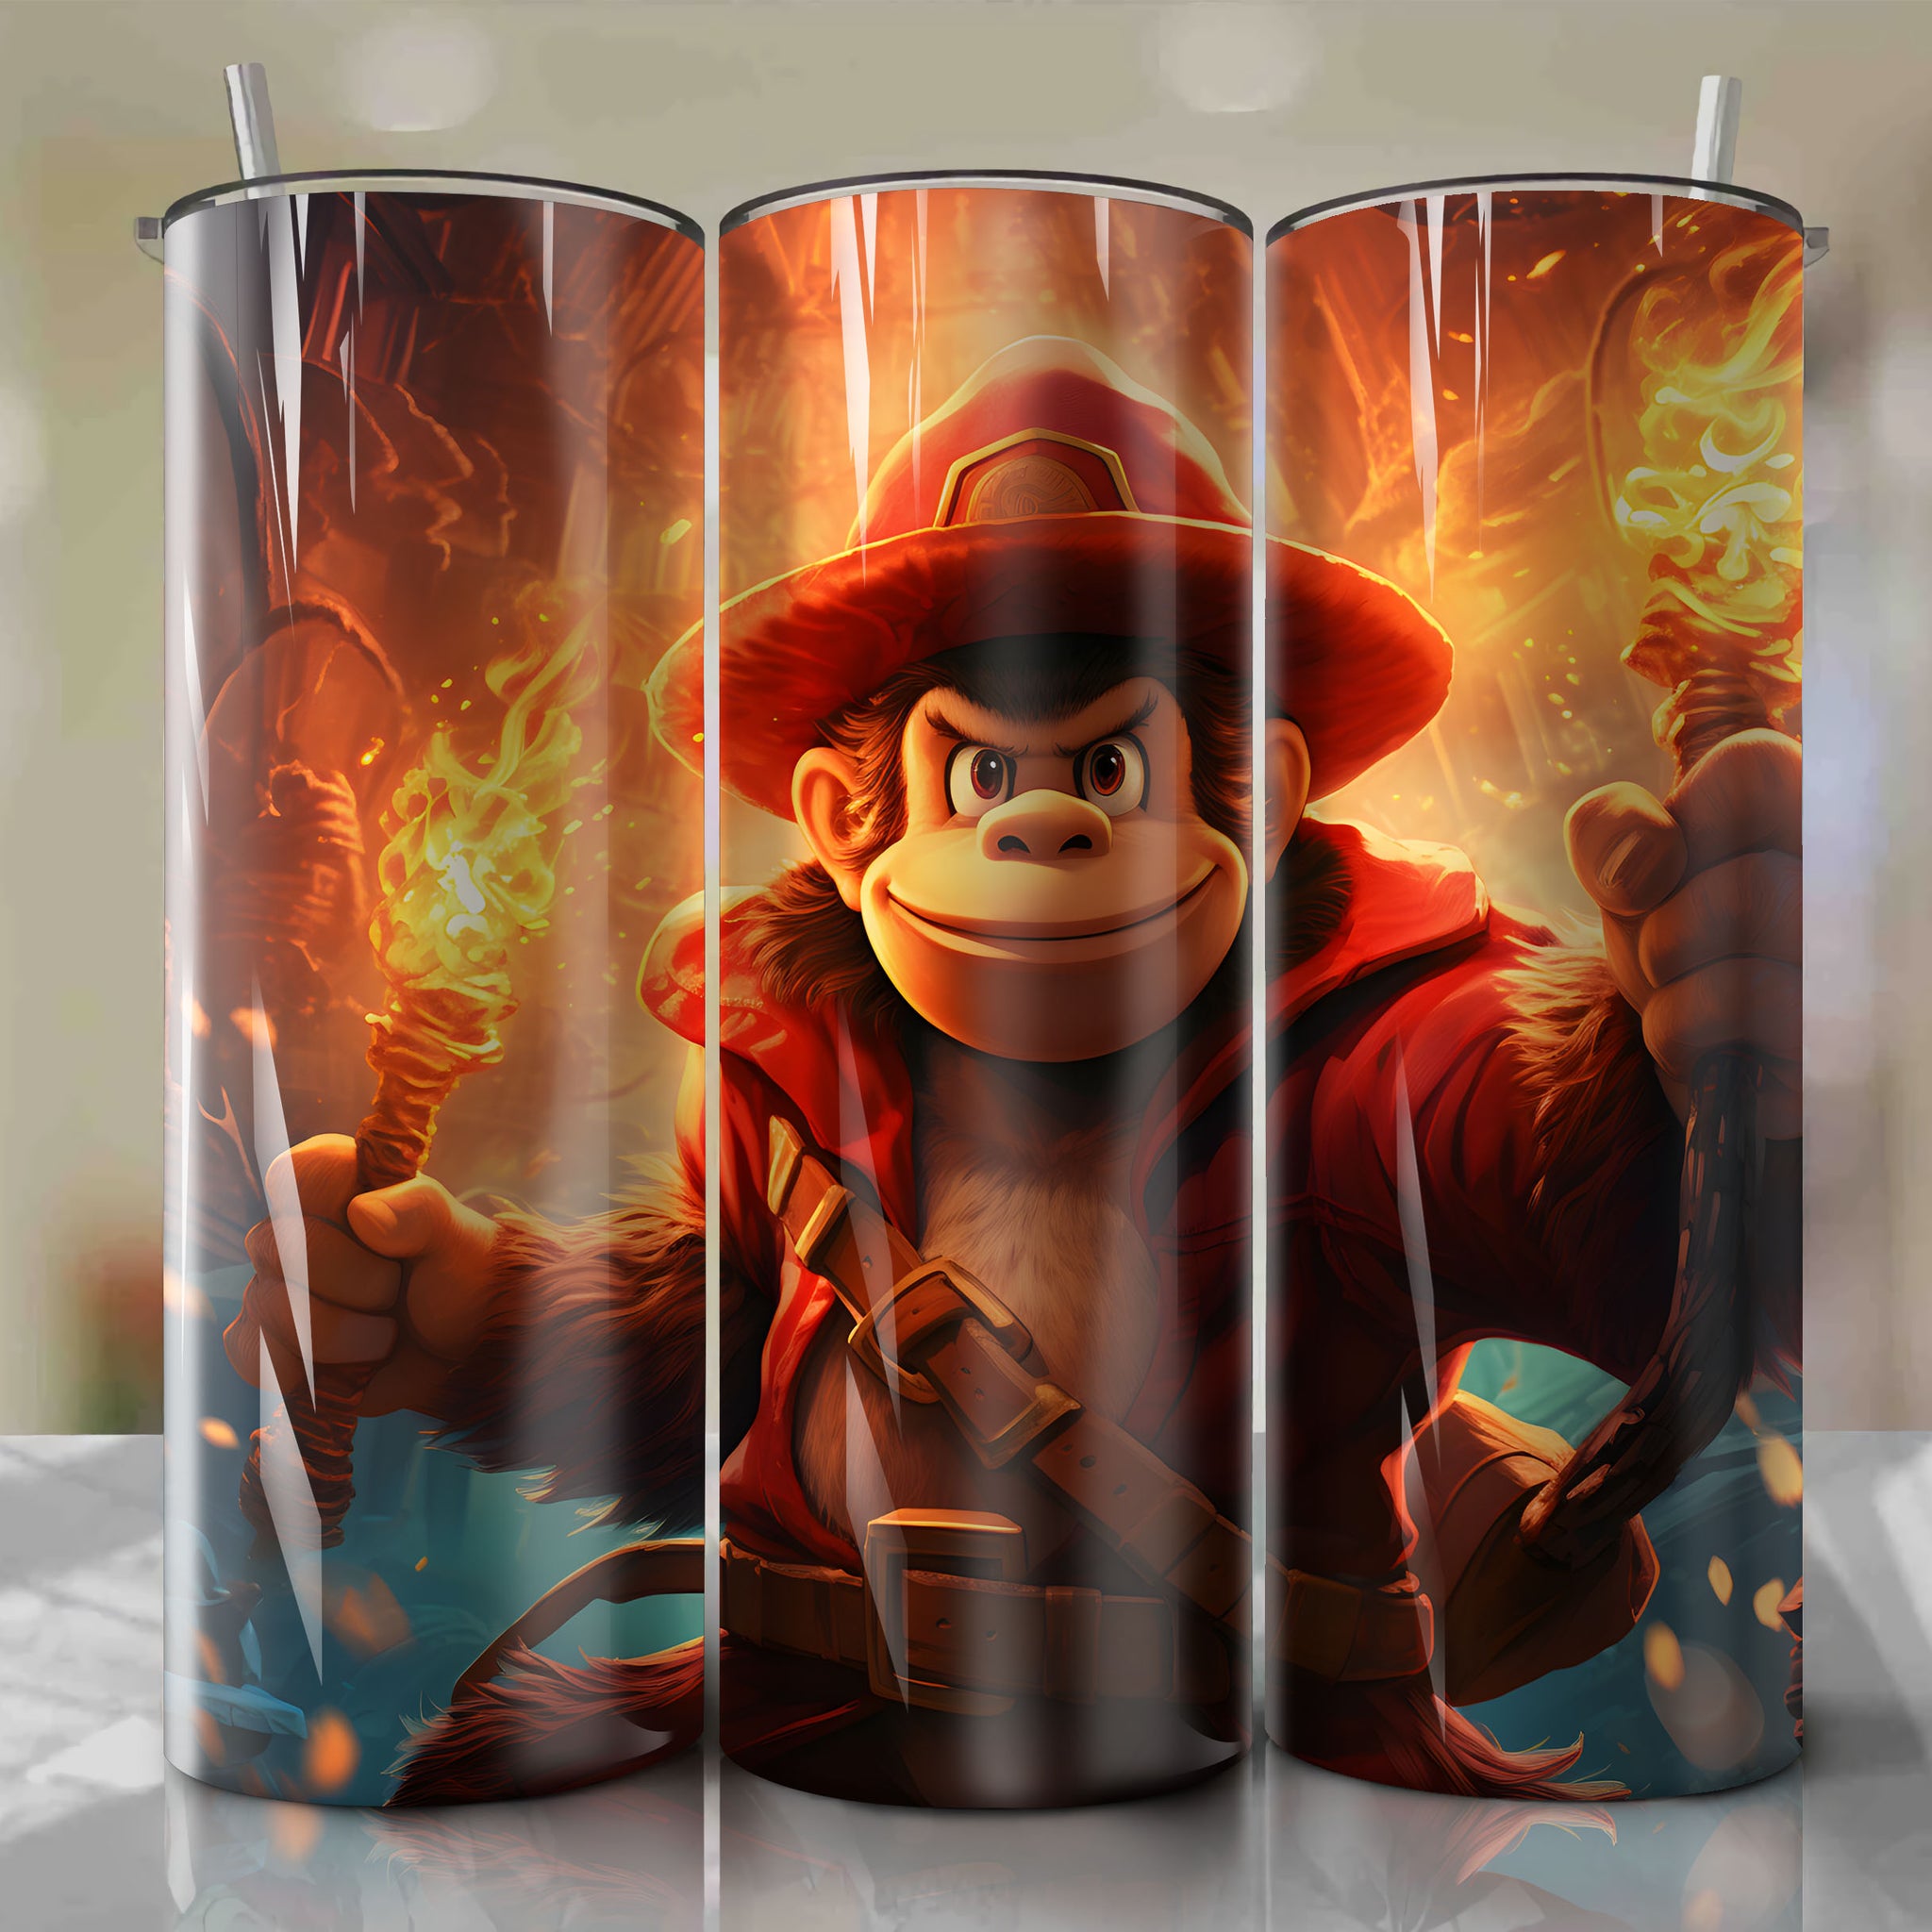 20 Oz Tumbler Wrap - Adventure with Diddy Kong and Dan Mumford's Playful Artwork
